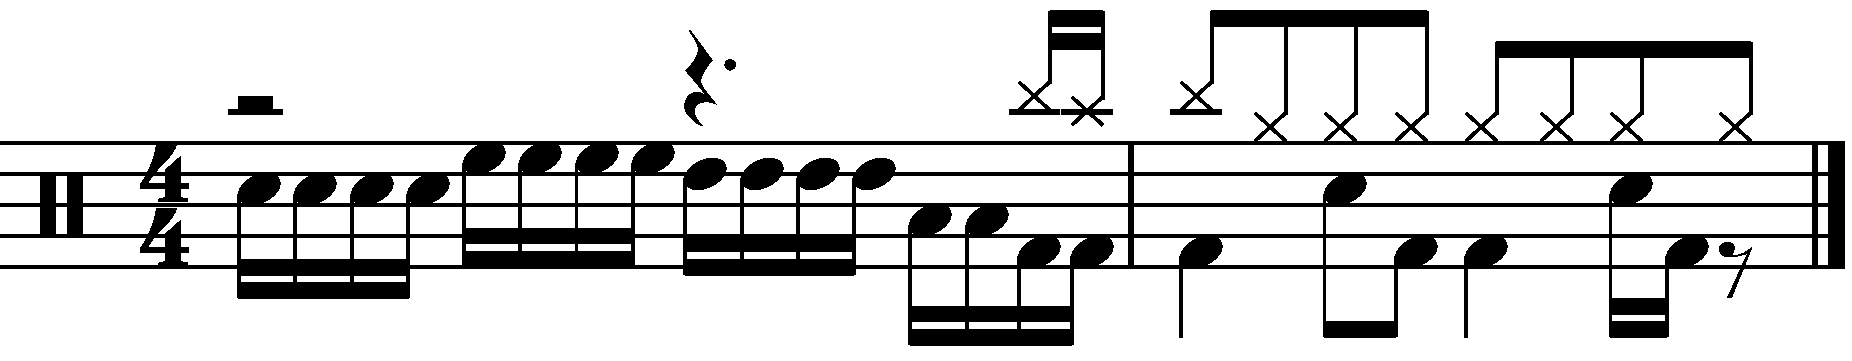 The concept applied to a roll based fill